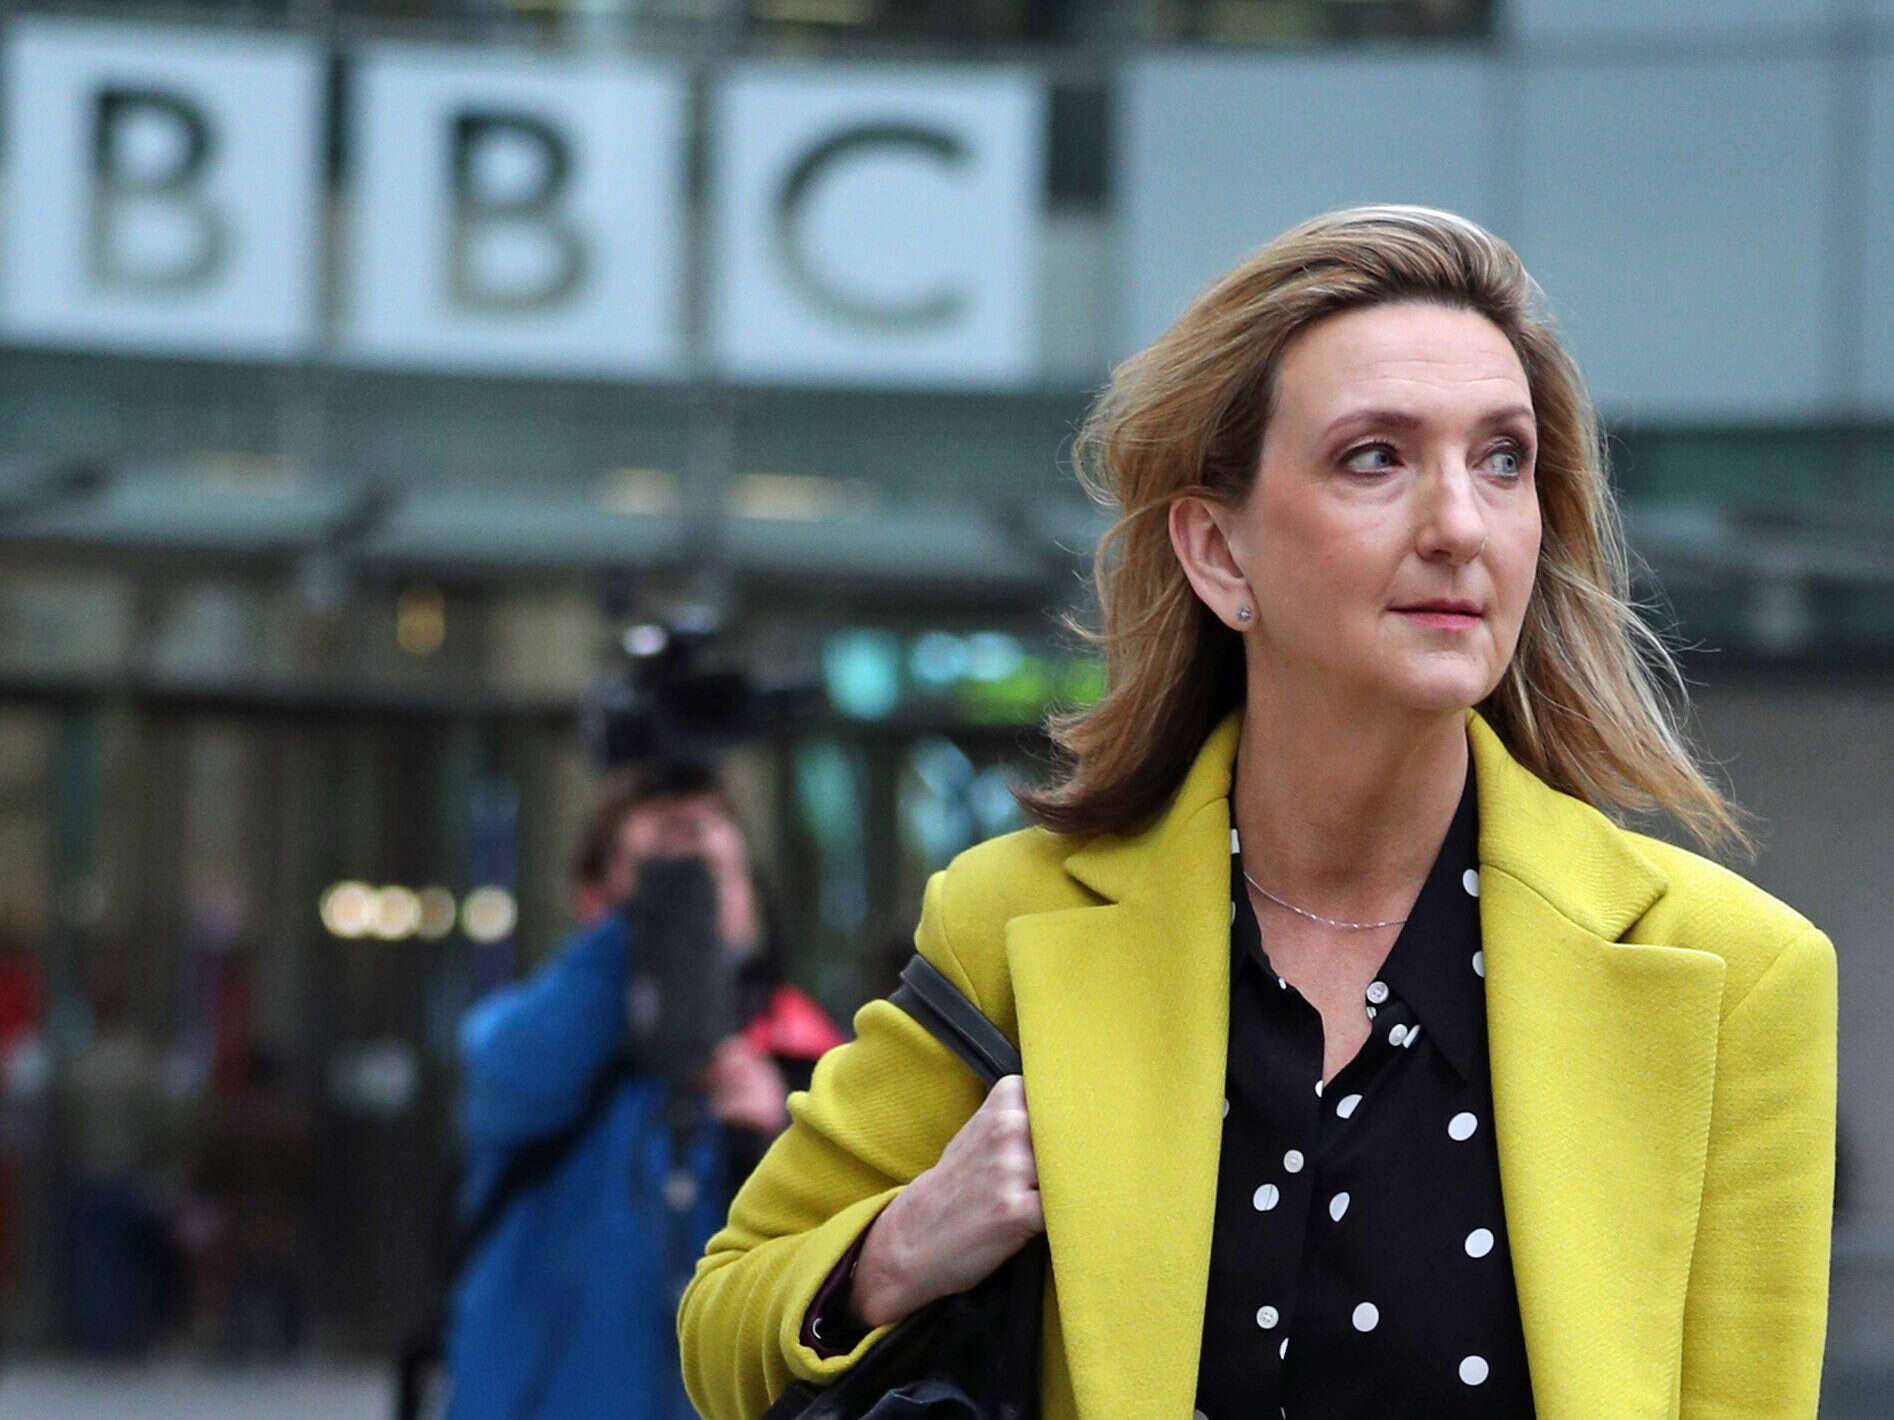 BBC director-general says he hopes Victoria Derbyshire Show's journalism 'will find home' on news channel